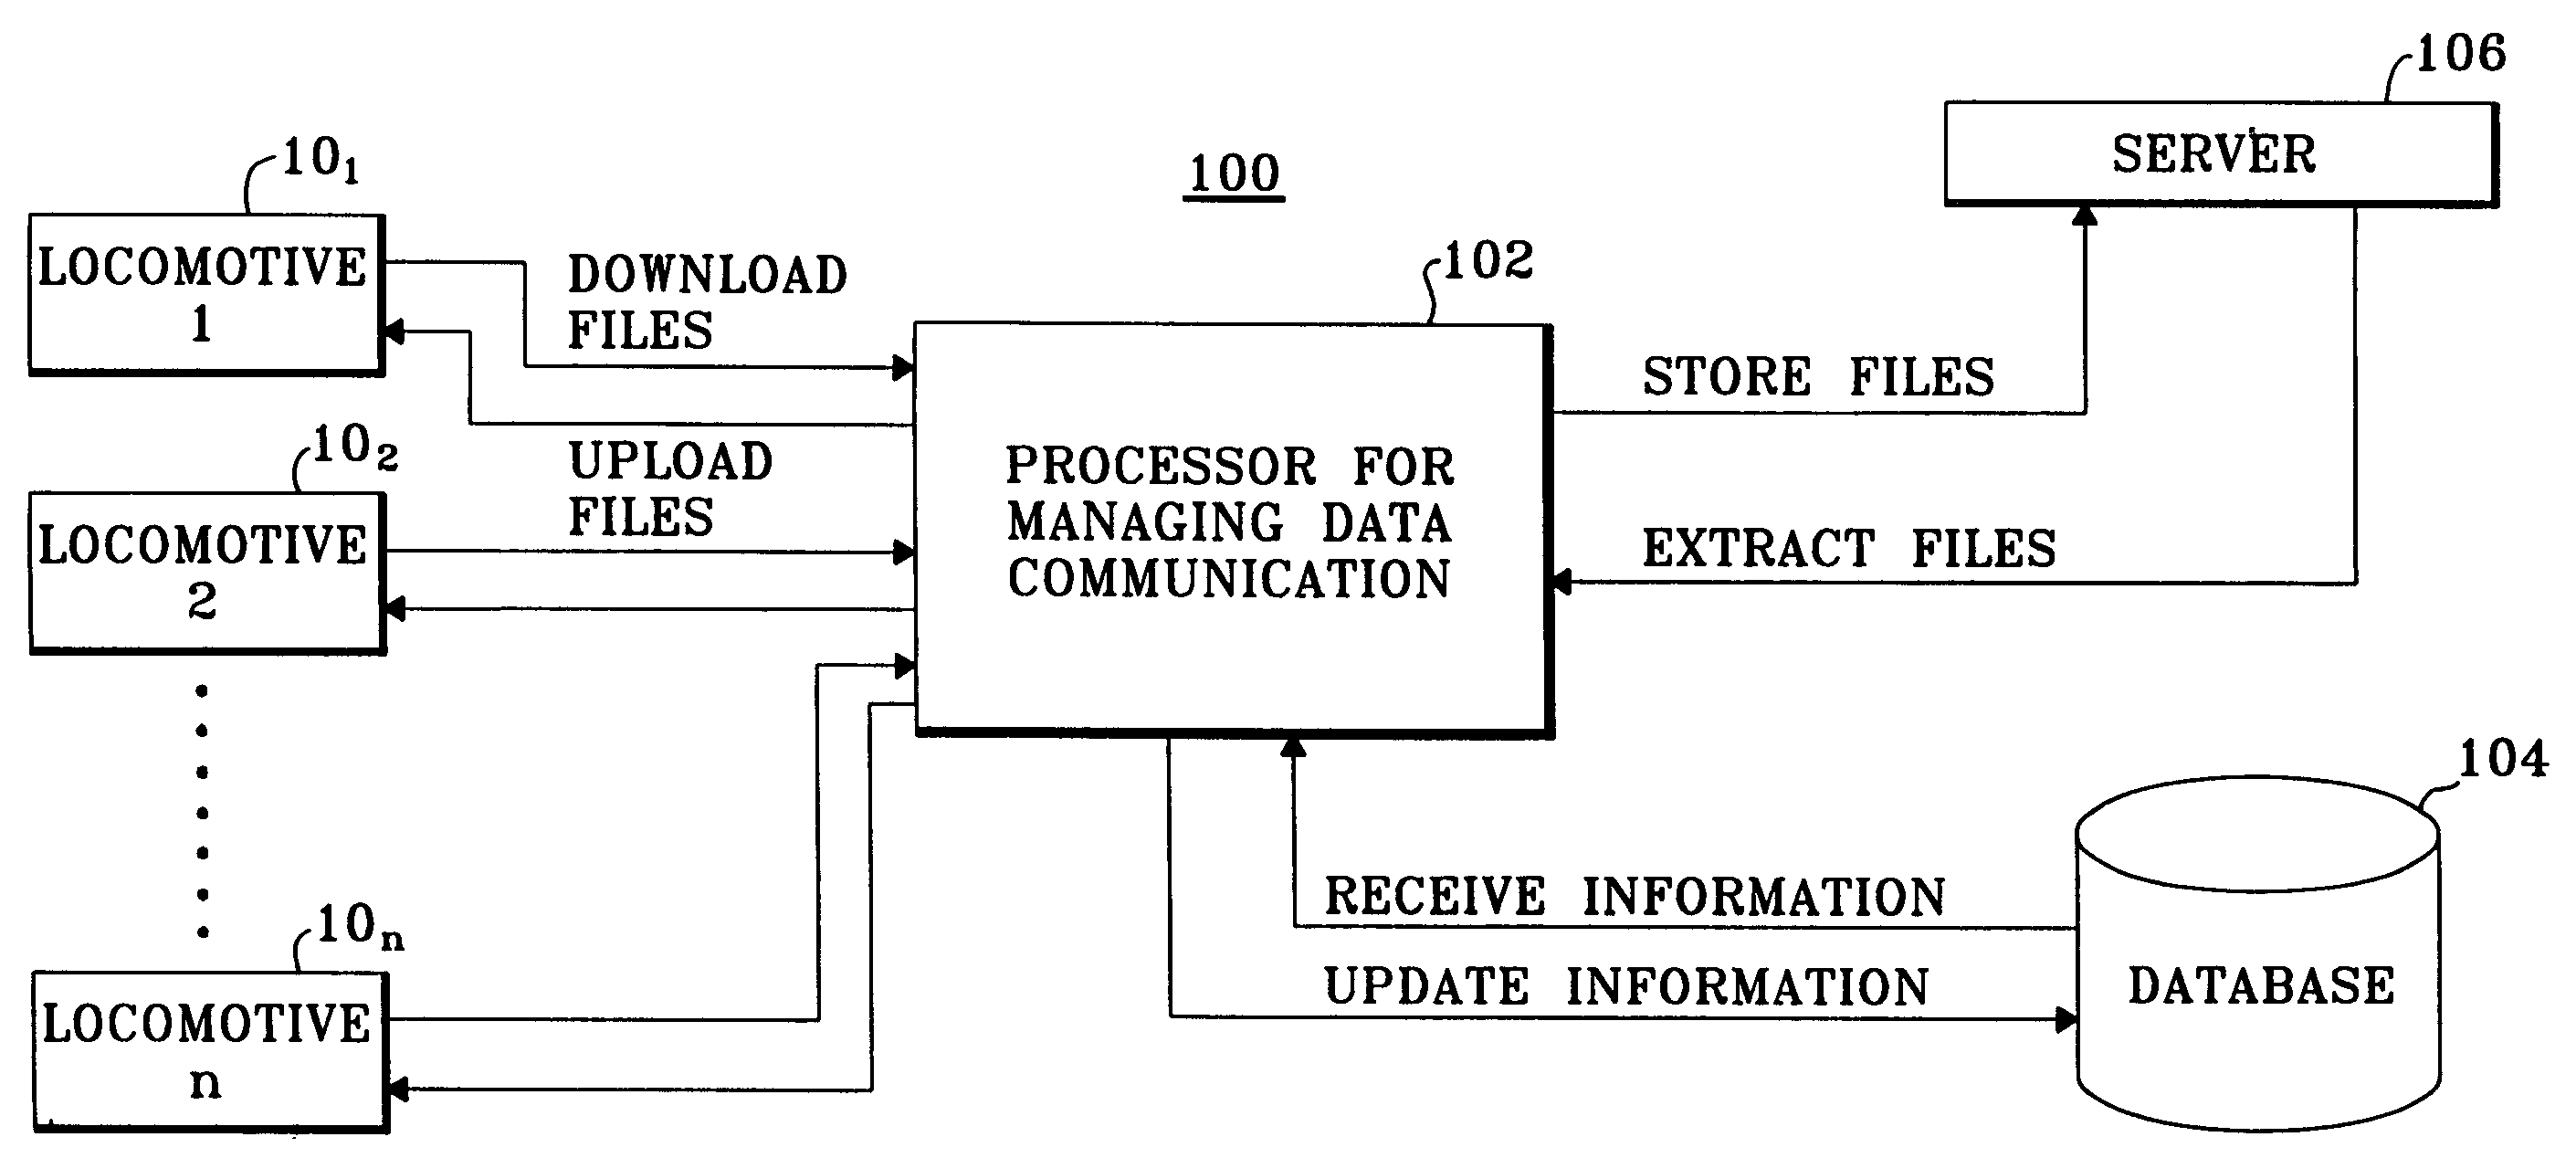 Method and system for remotely managing communication of data used for predicting malfunctions in a plurality of machines